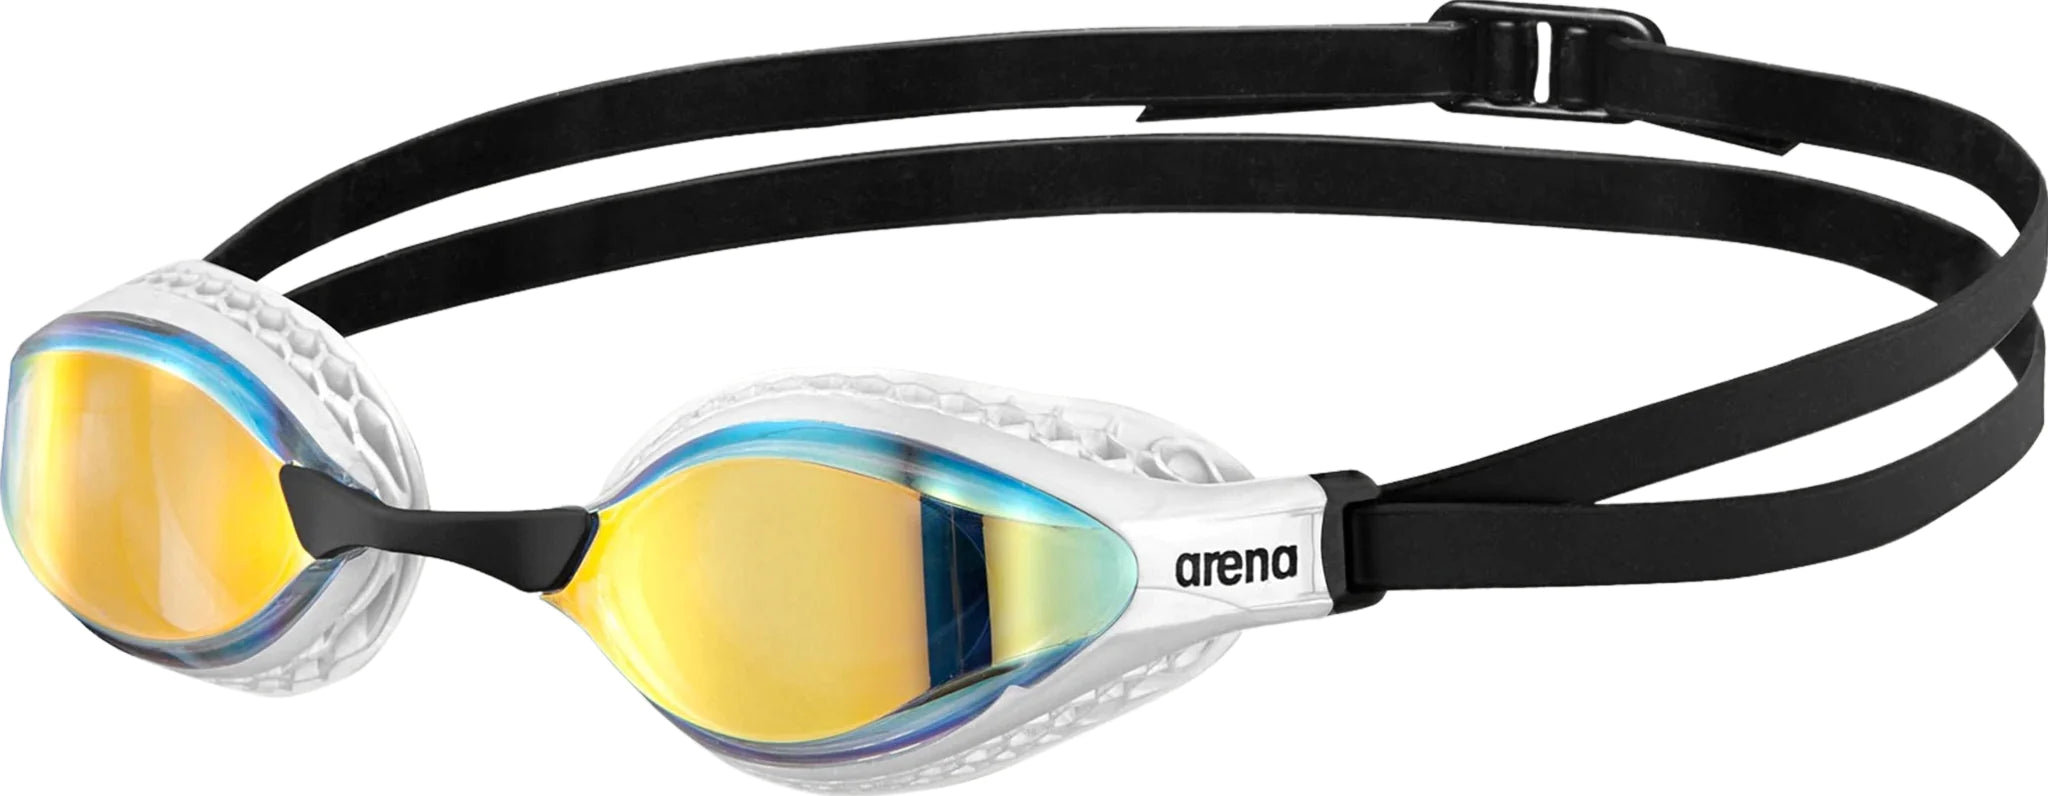 ARENA AIR SPEED MIRROR GOGGLES - YELLOW COPPER/WHITE